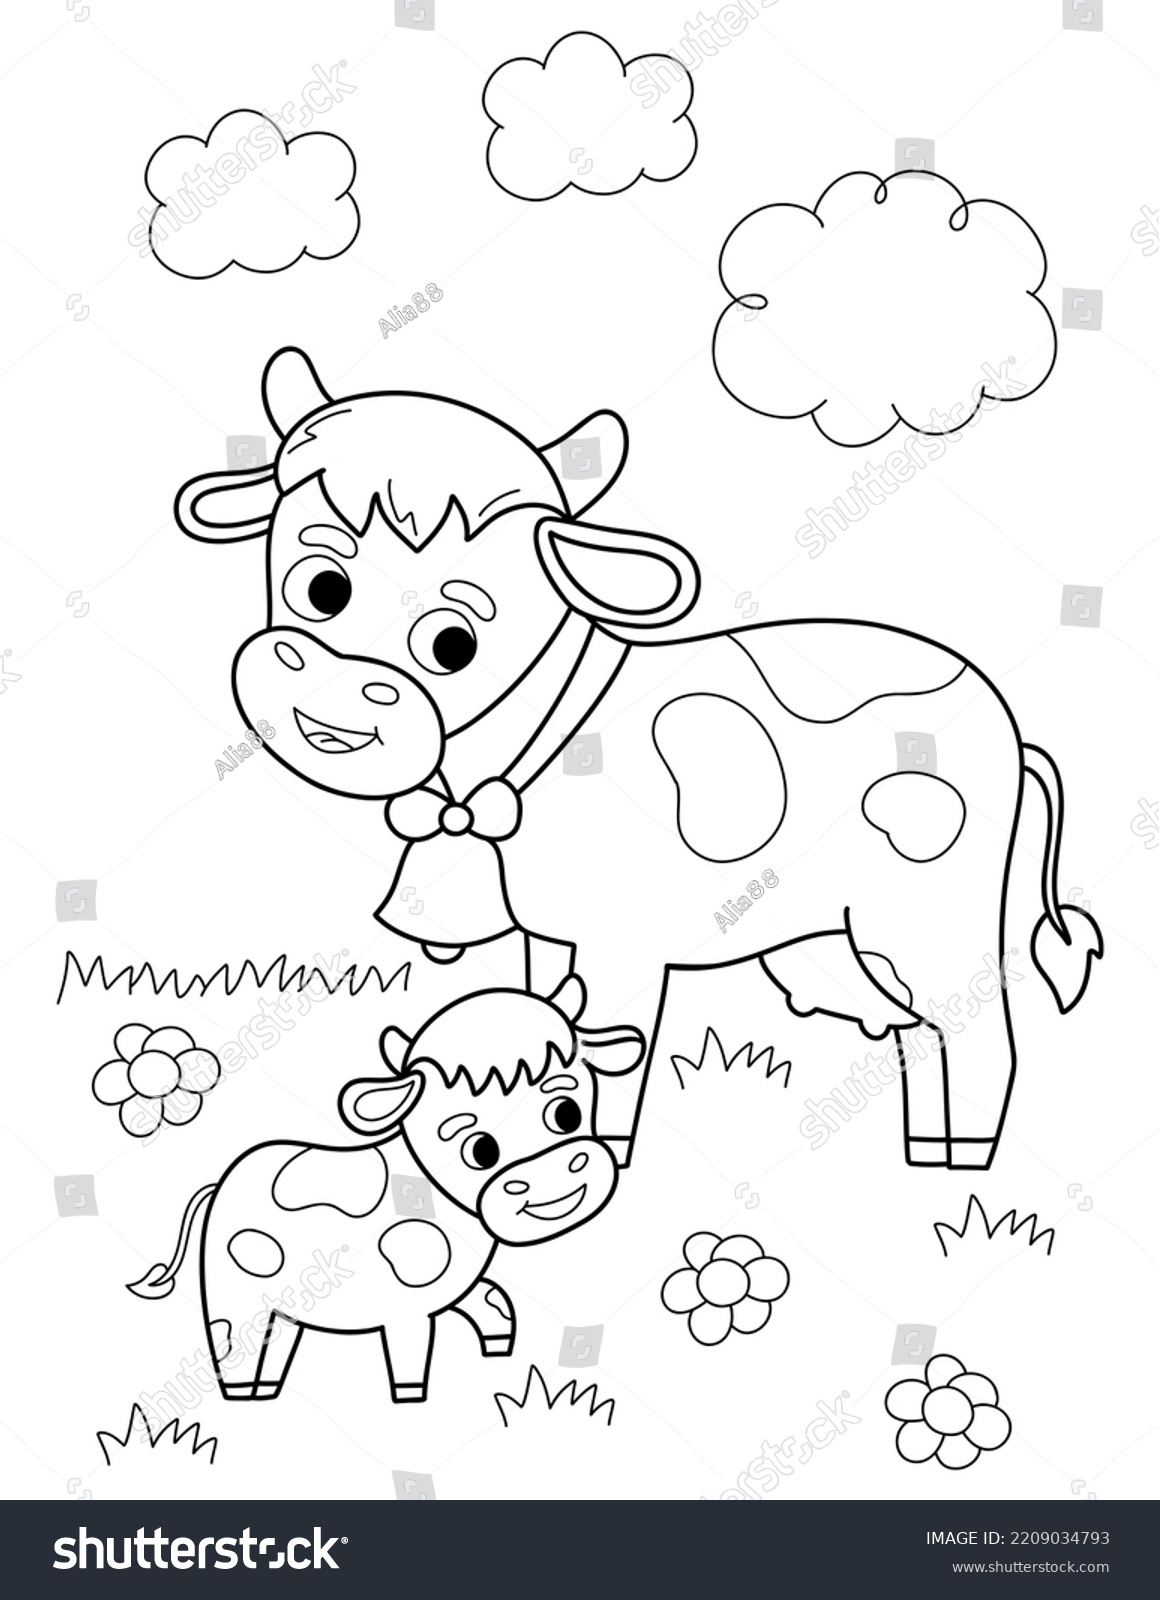 Coloring Page Outline Cartoon Cute Cows Stock Illustration 2209034793 ...